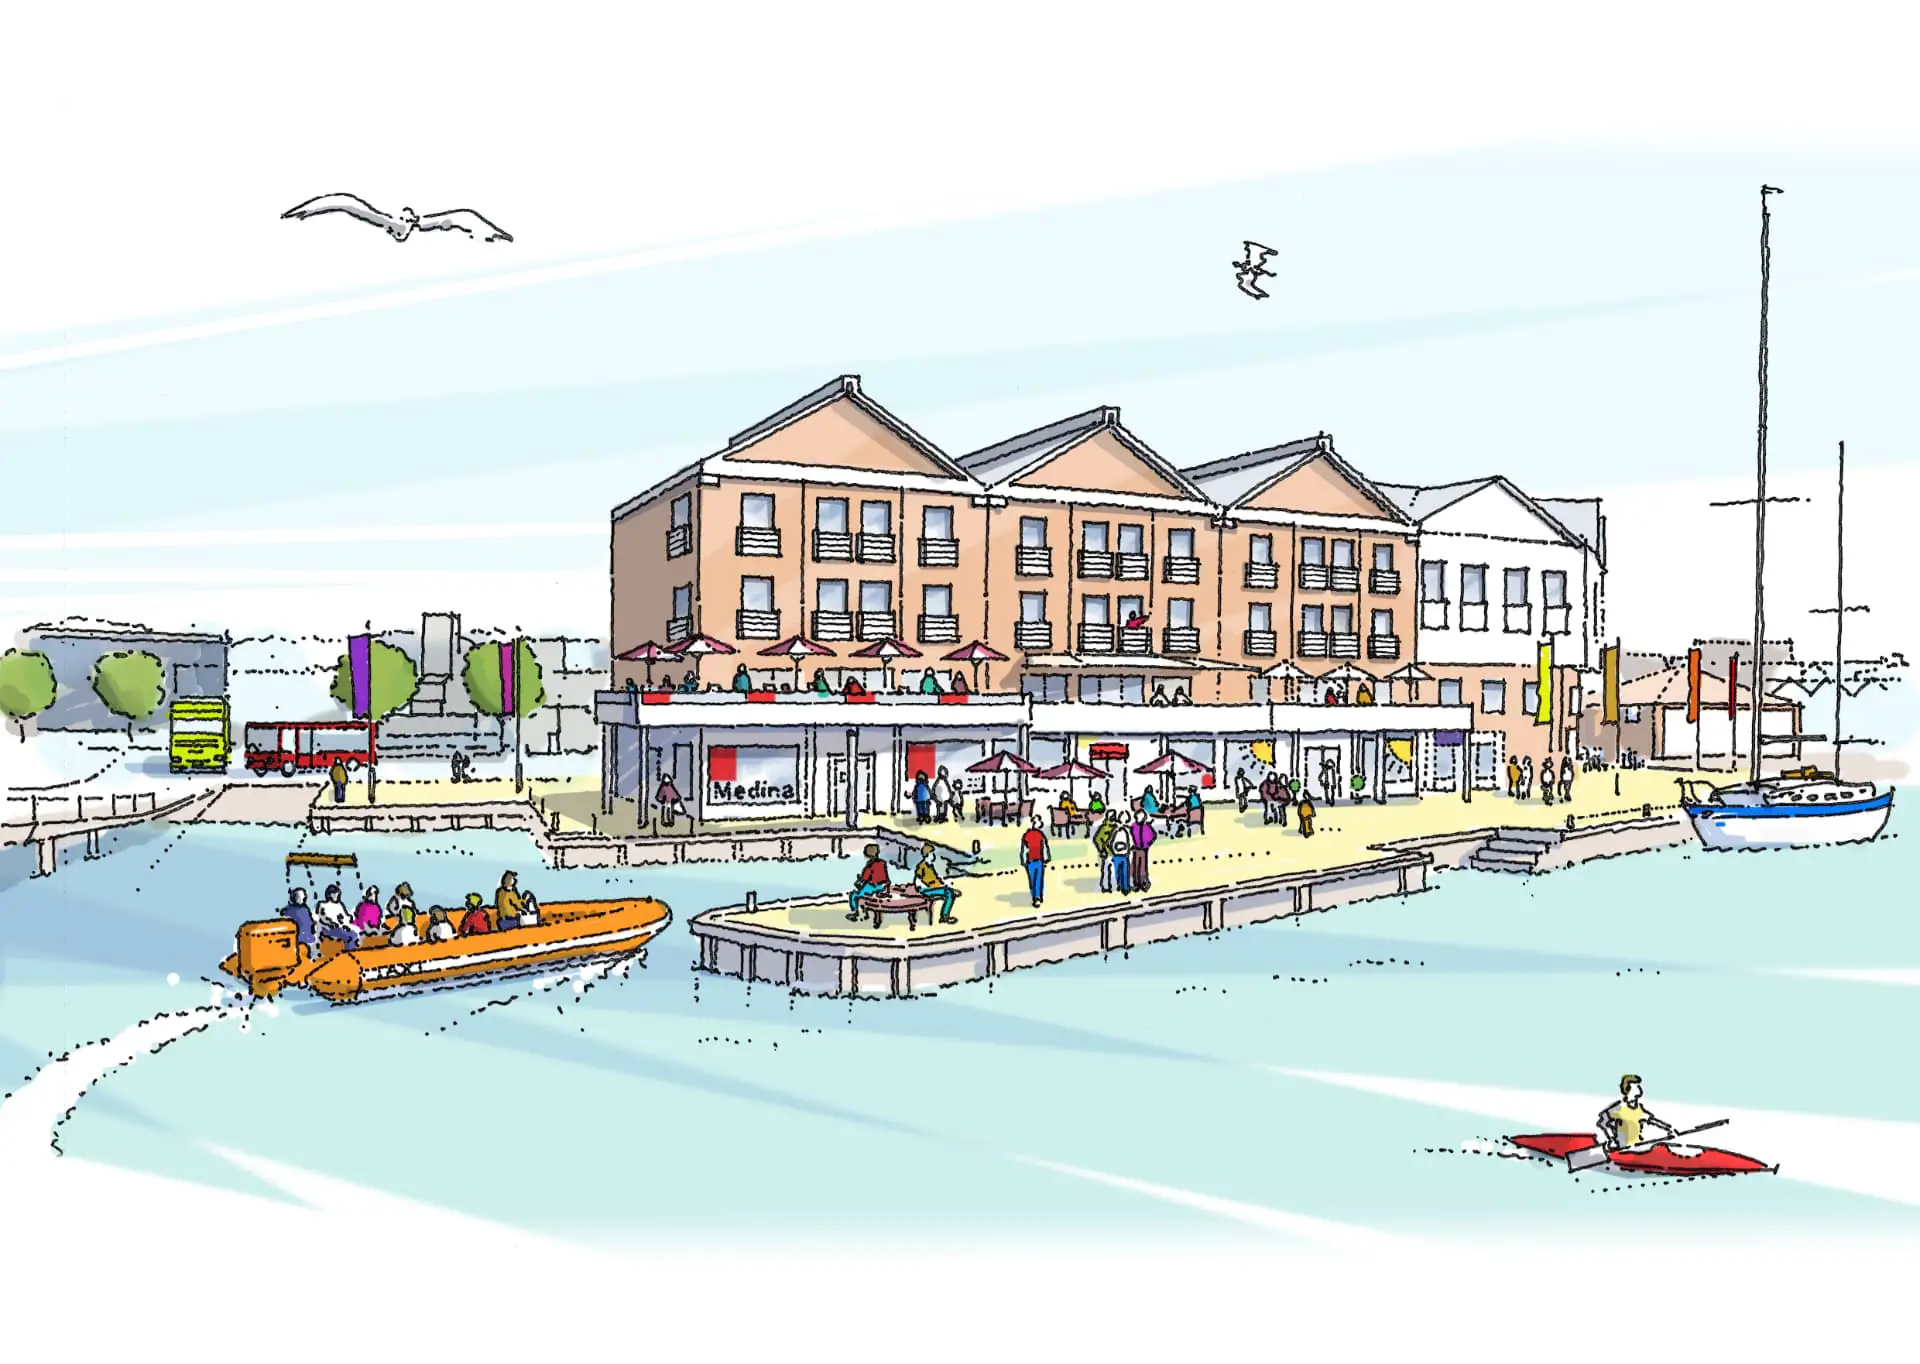 An artist's impression of how the 'mixed use development' could look